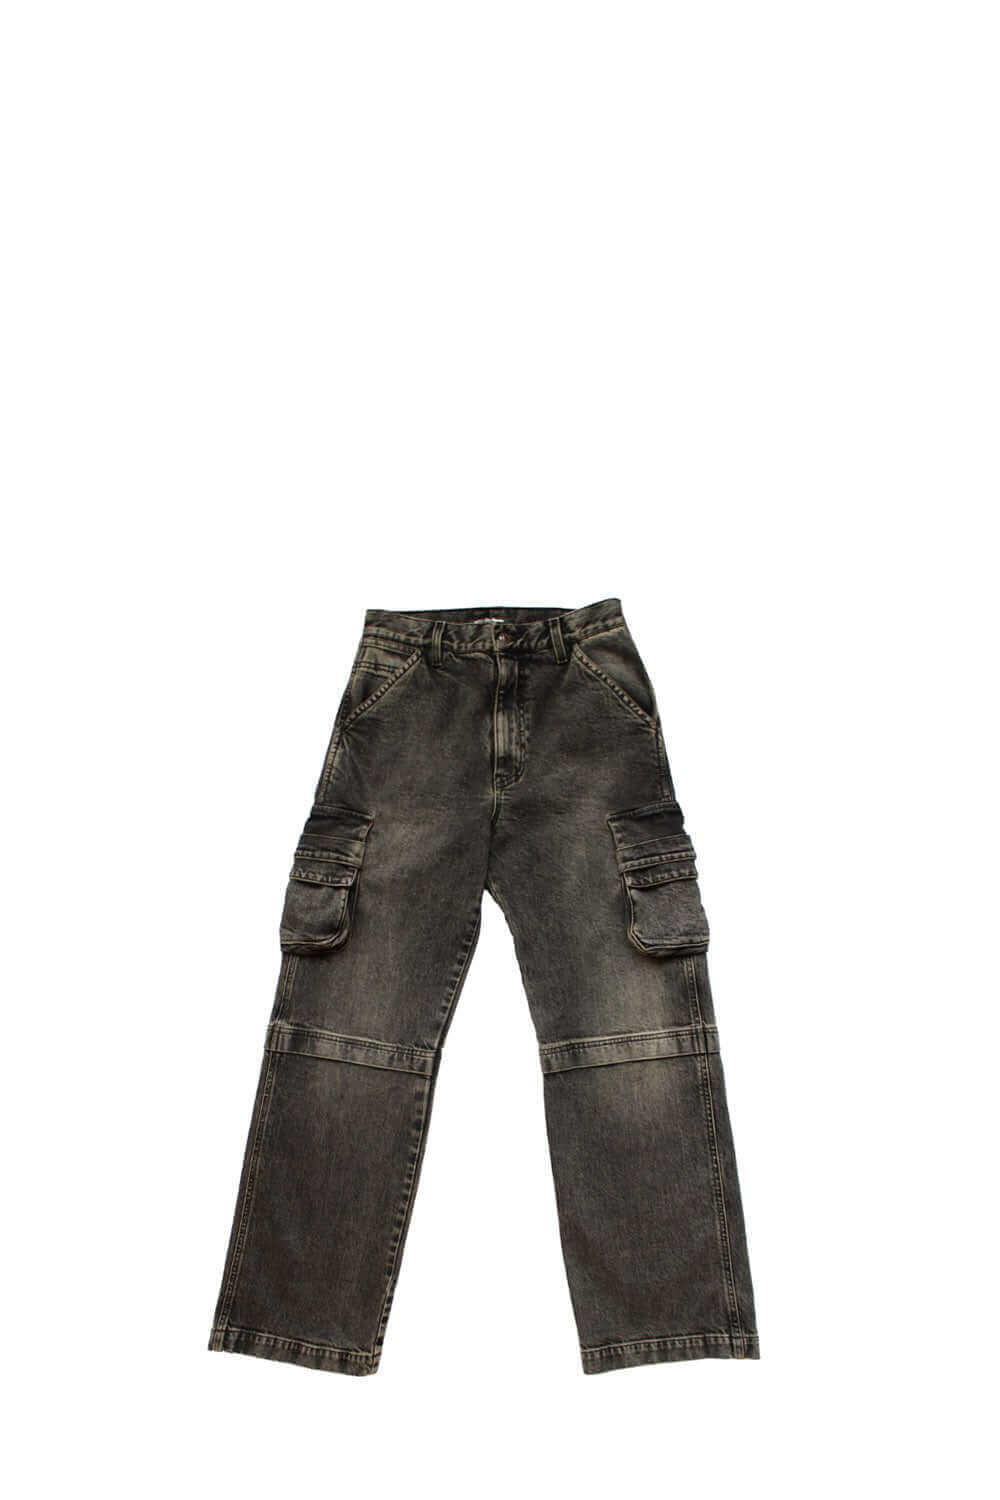 CARGO DENIM W Cargo denim with front button and zip closure. Frontal pockets. Side leg pockets and adjustable bottom closure. Composition: 100% Cotton HTC LOS ANGELES